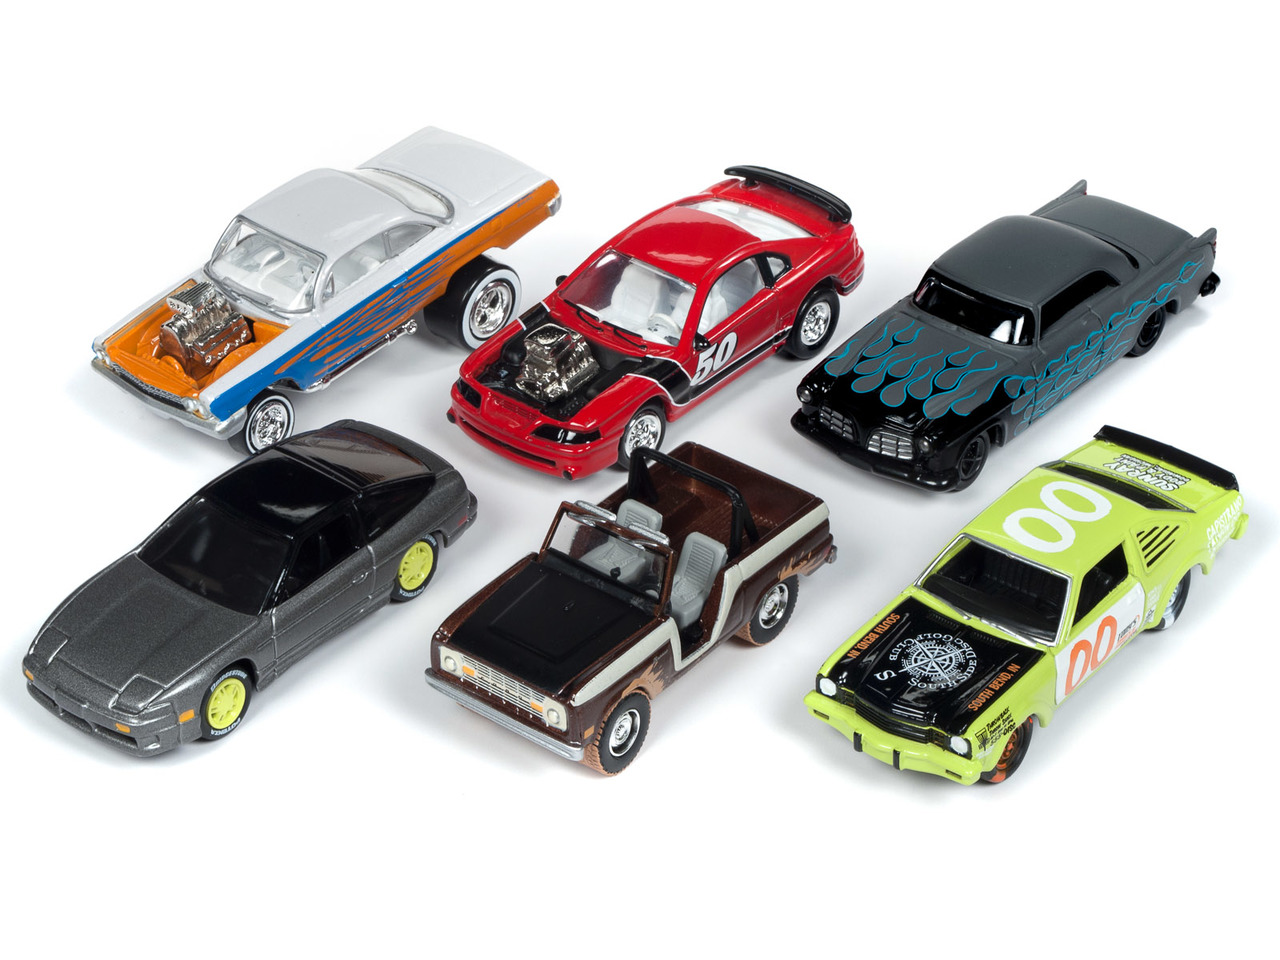 "Street Freaks" 2019 Release 1 Set B of 6 Cars Limited Edition to 3000 pieces Worldwide 1/64 Diecast Models by Johnny Lightning